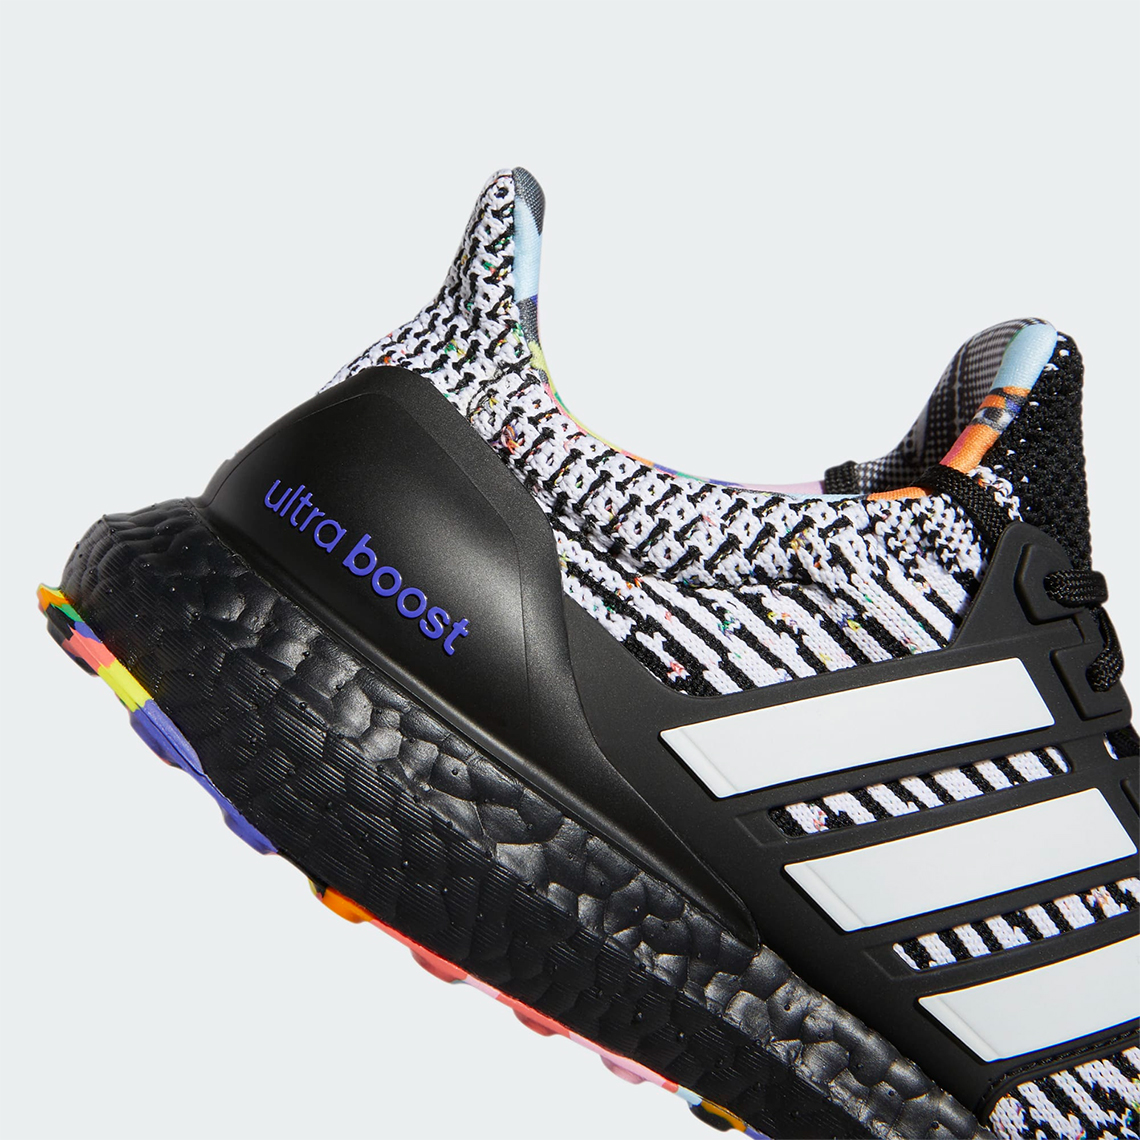 adidas ultraboost 5 dna pride month kris andrew gy4424 4